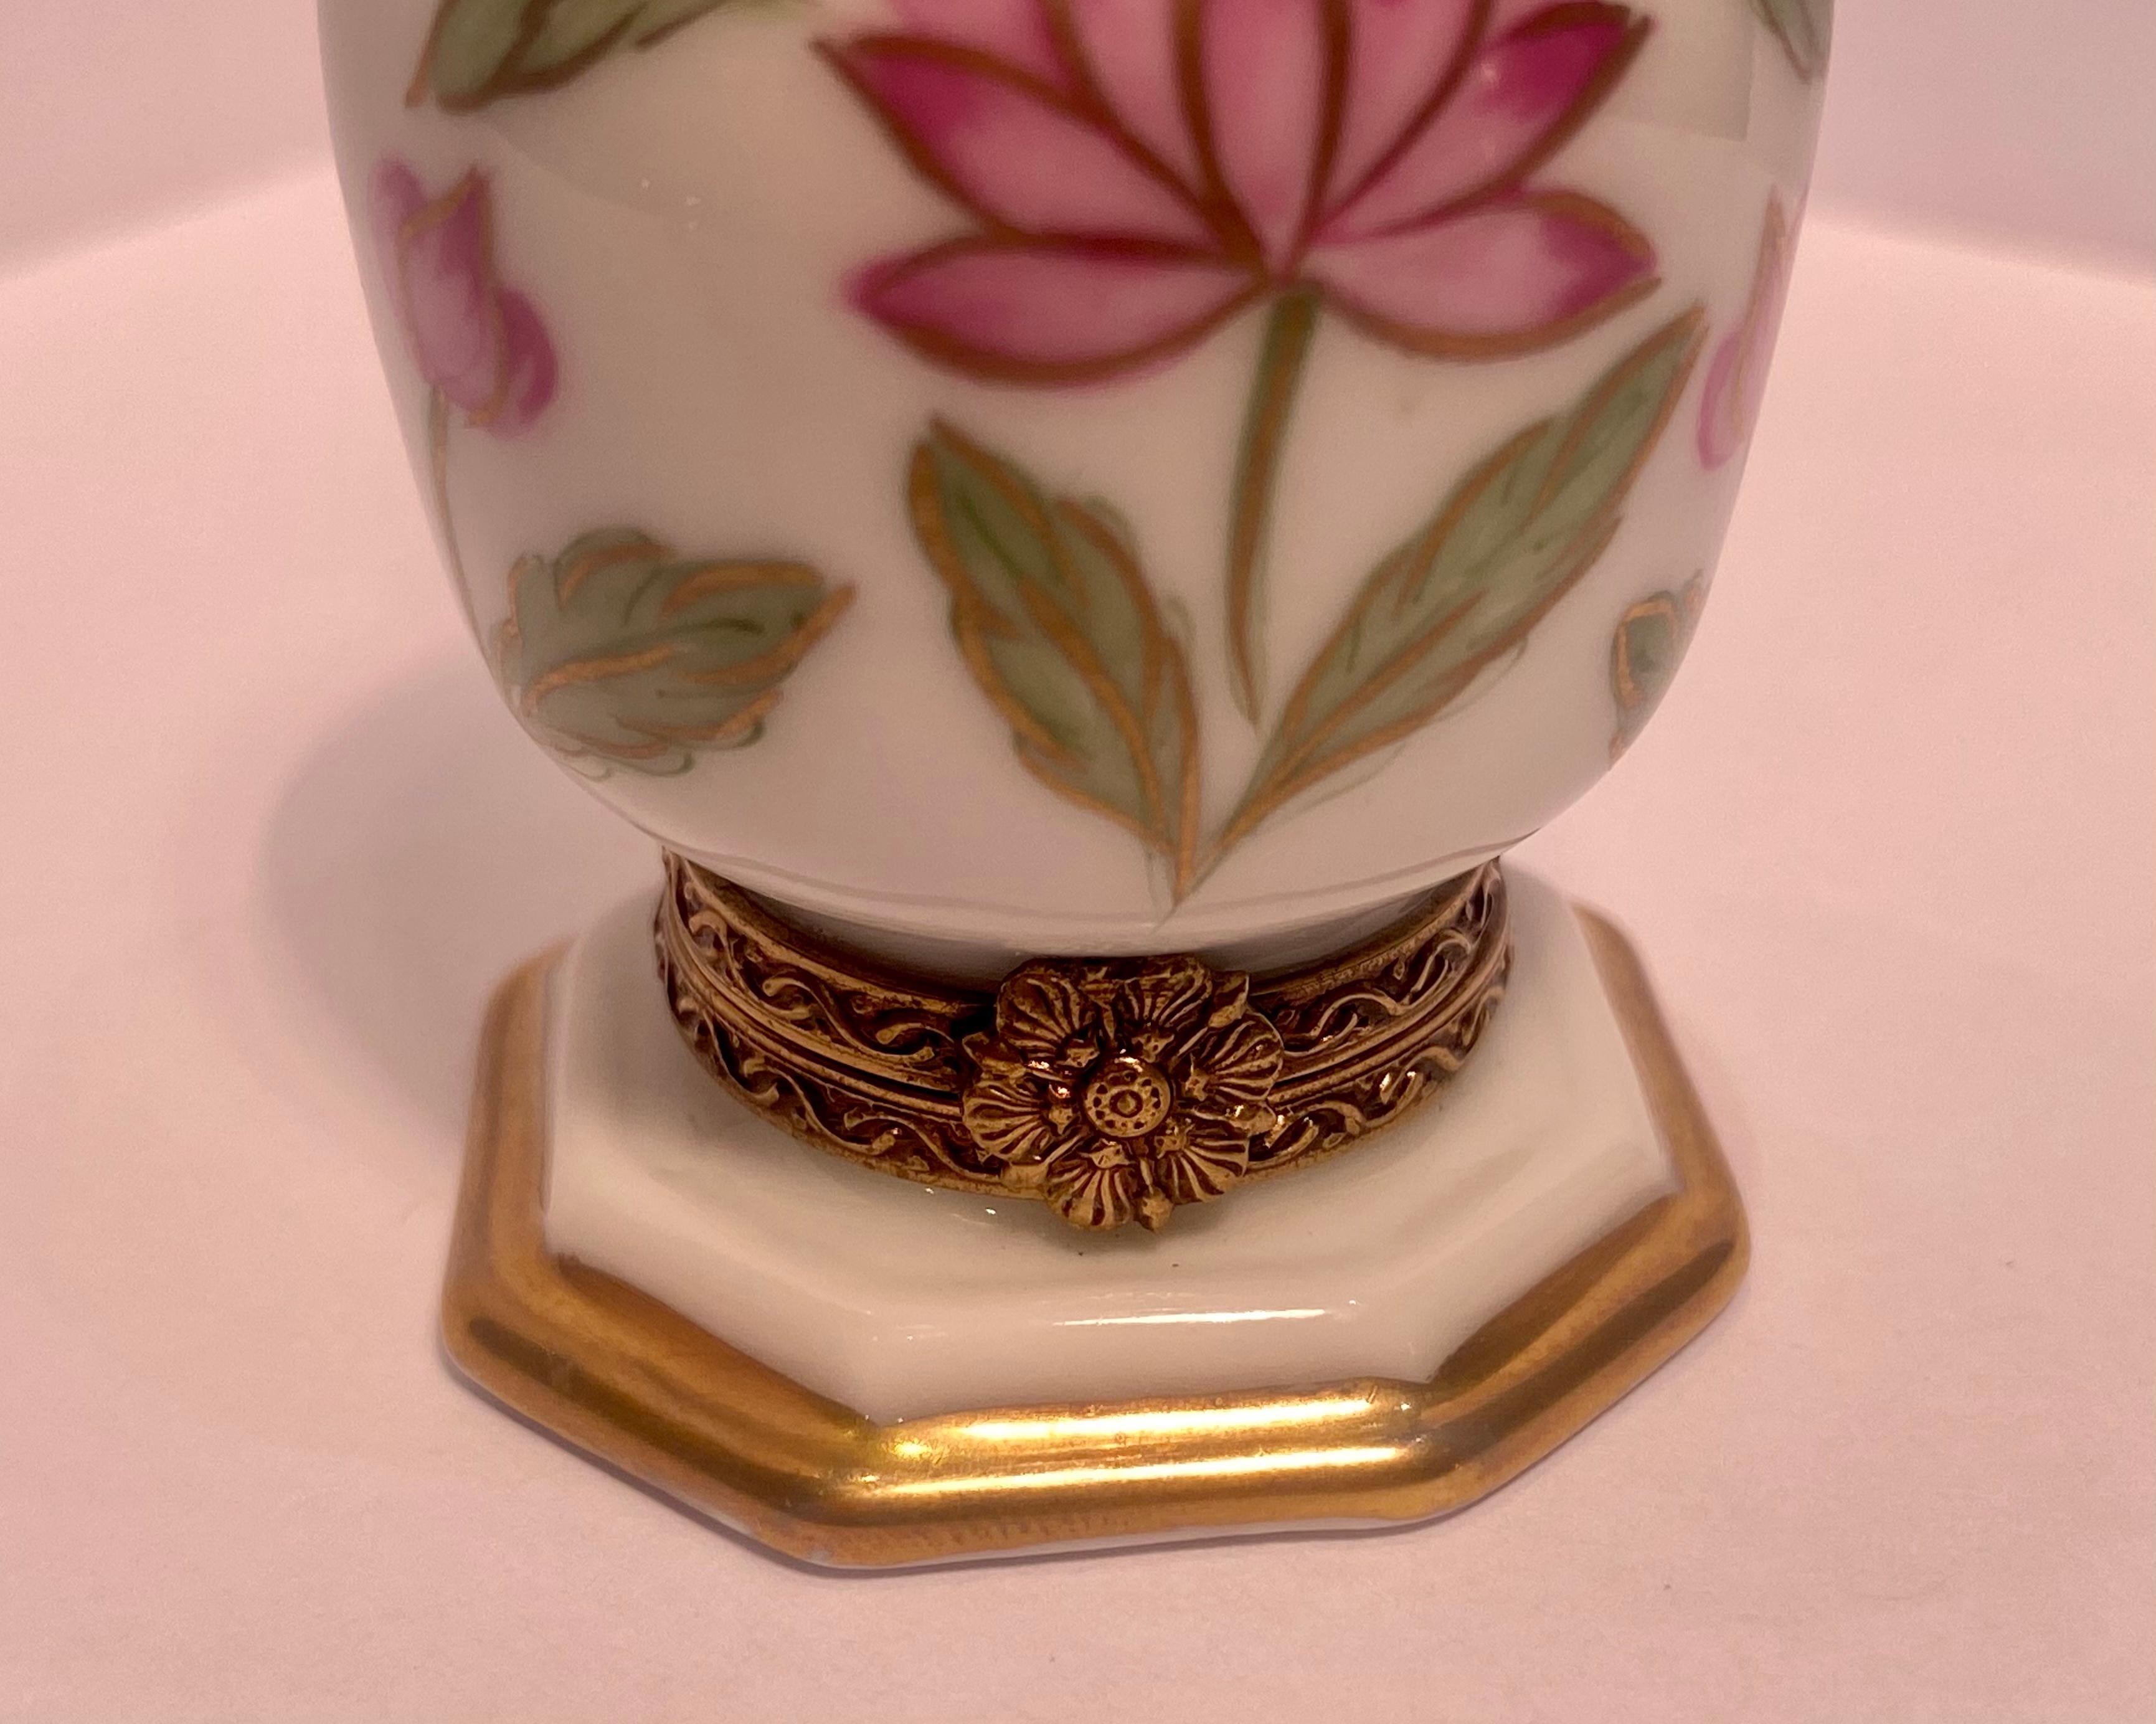 French Unique Limoges France Hand Painted Porcelain Vase Trinket Box with Lotus Flowers For Sale